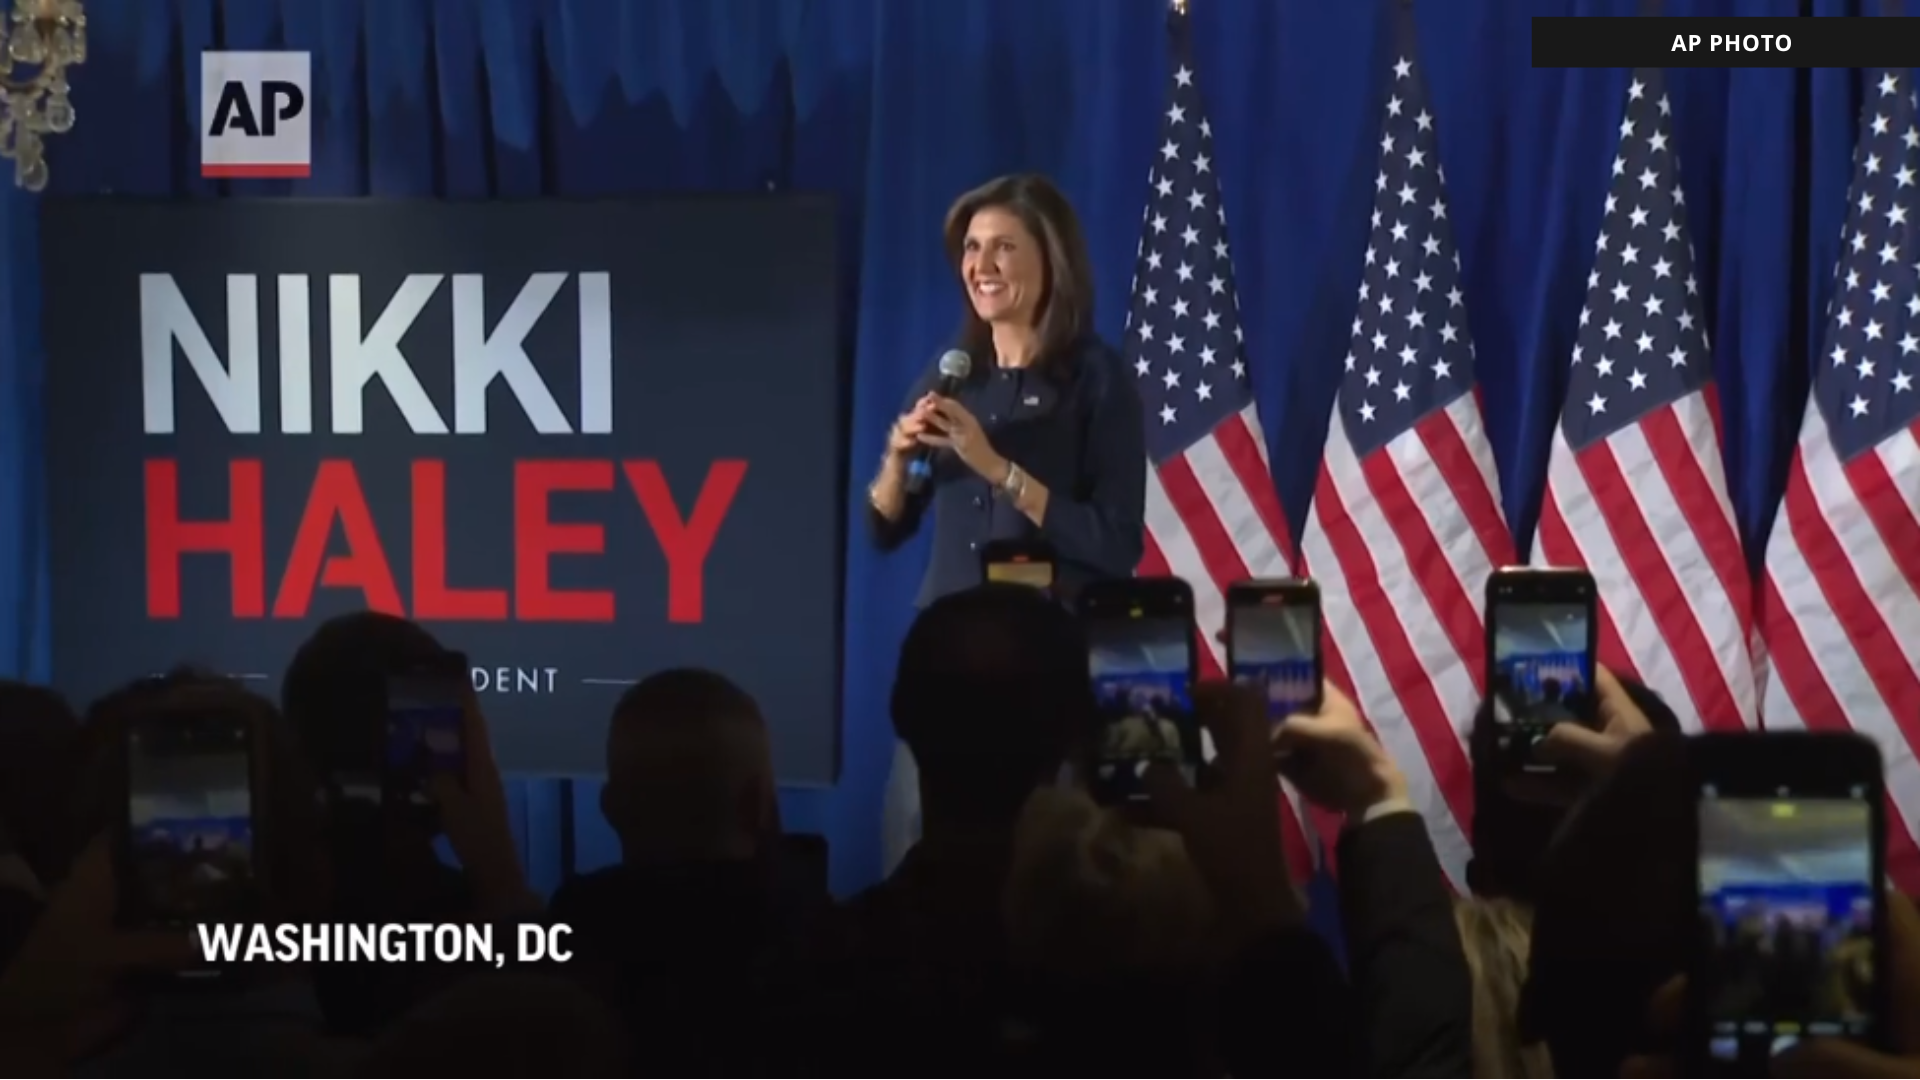 Nikki Haley wins the District of Columbia’s Republican primary and gets her first 2024 victory